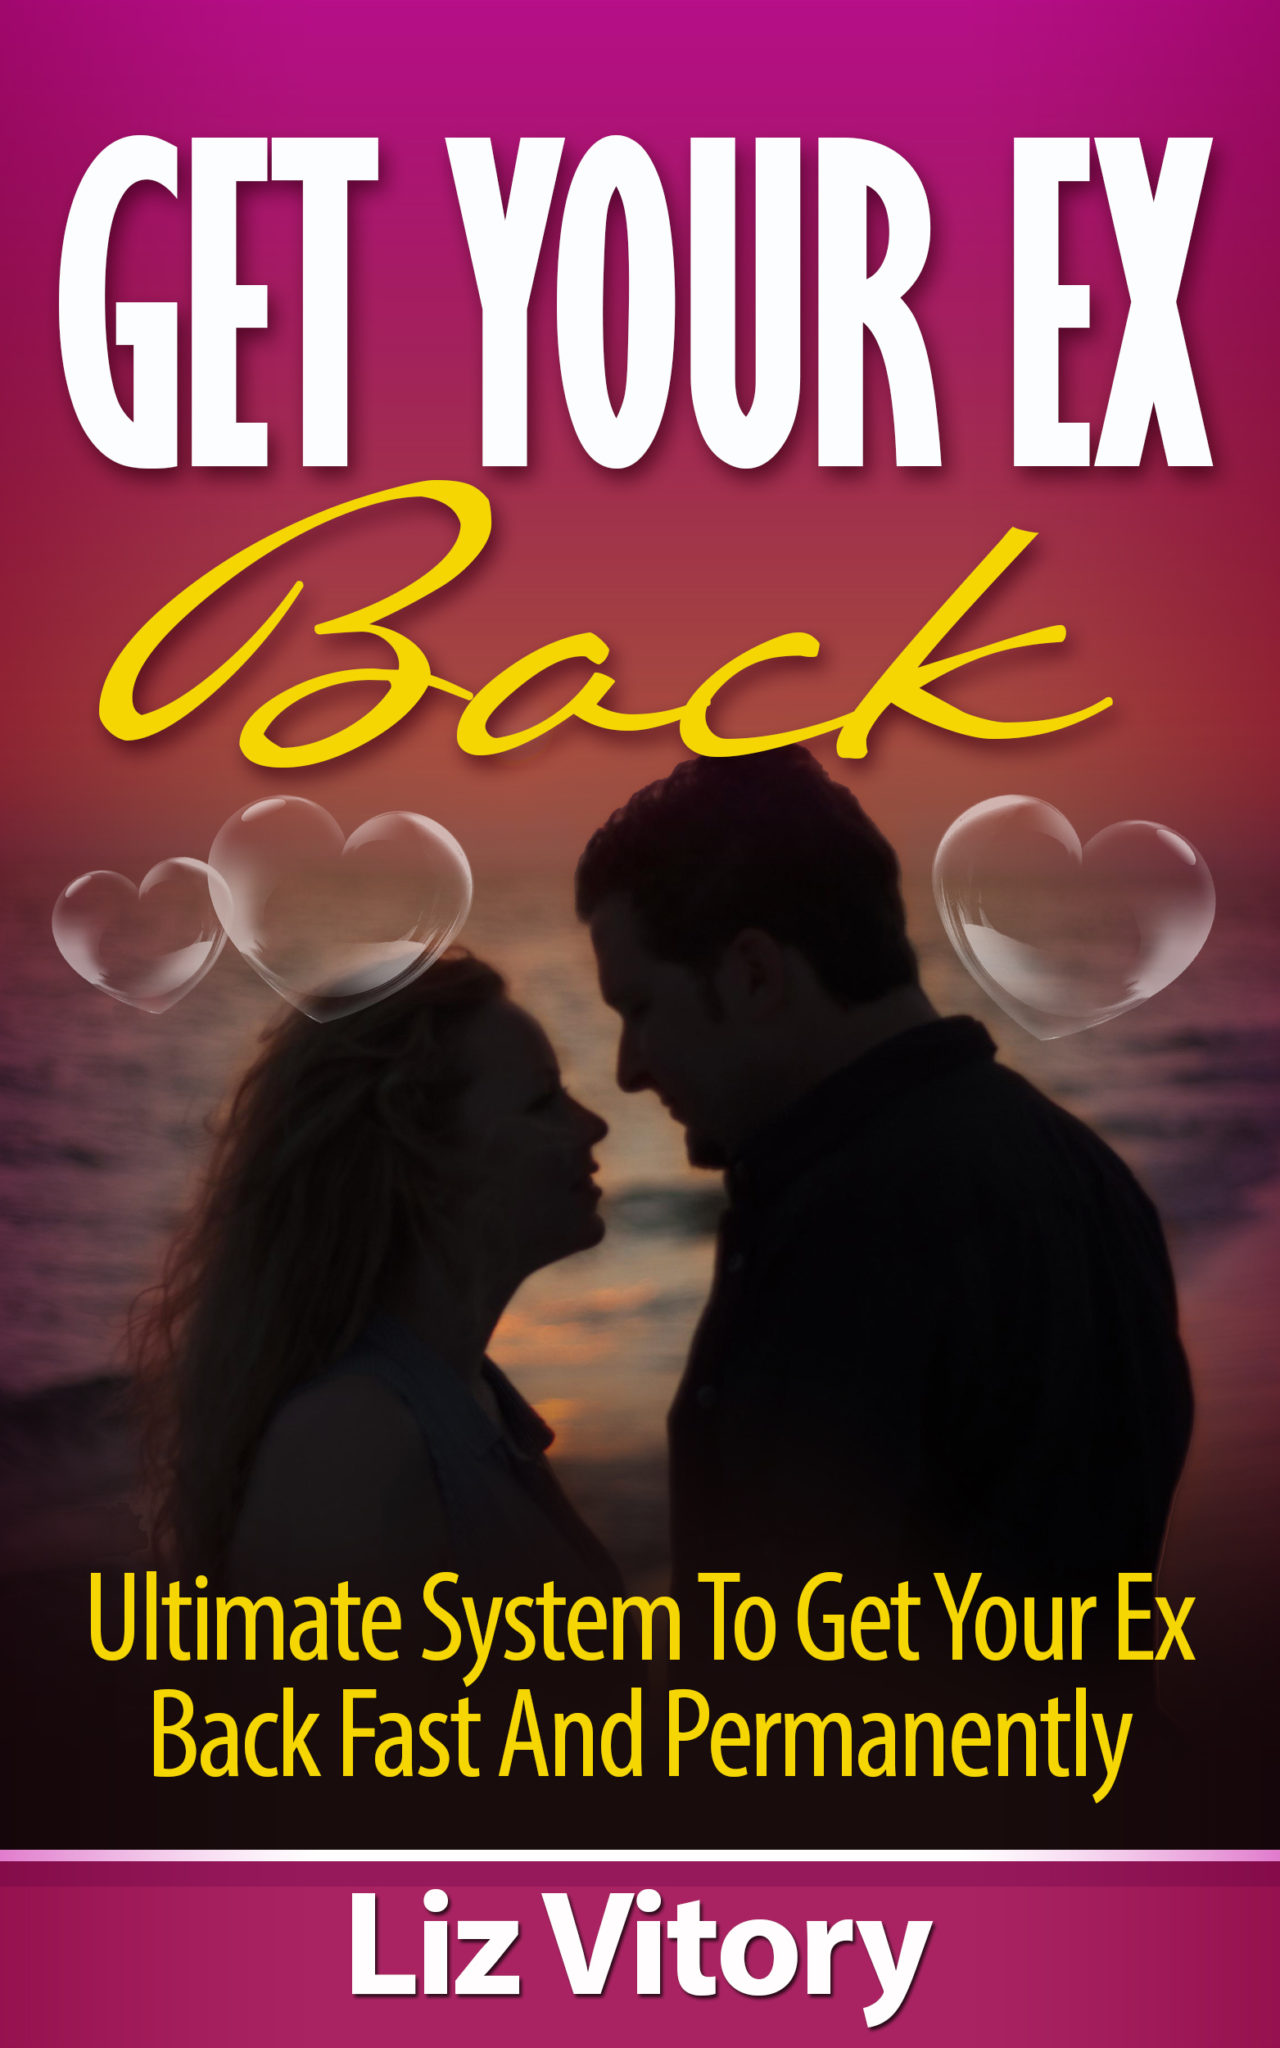 FREE: Get Your Ex Back: Ultimate System to Get Your Ex Back Fast and Permanently by Liz Vitory